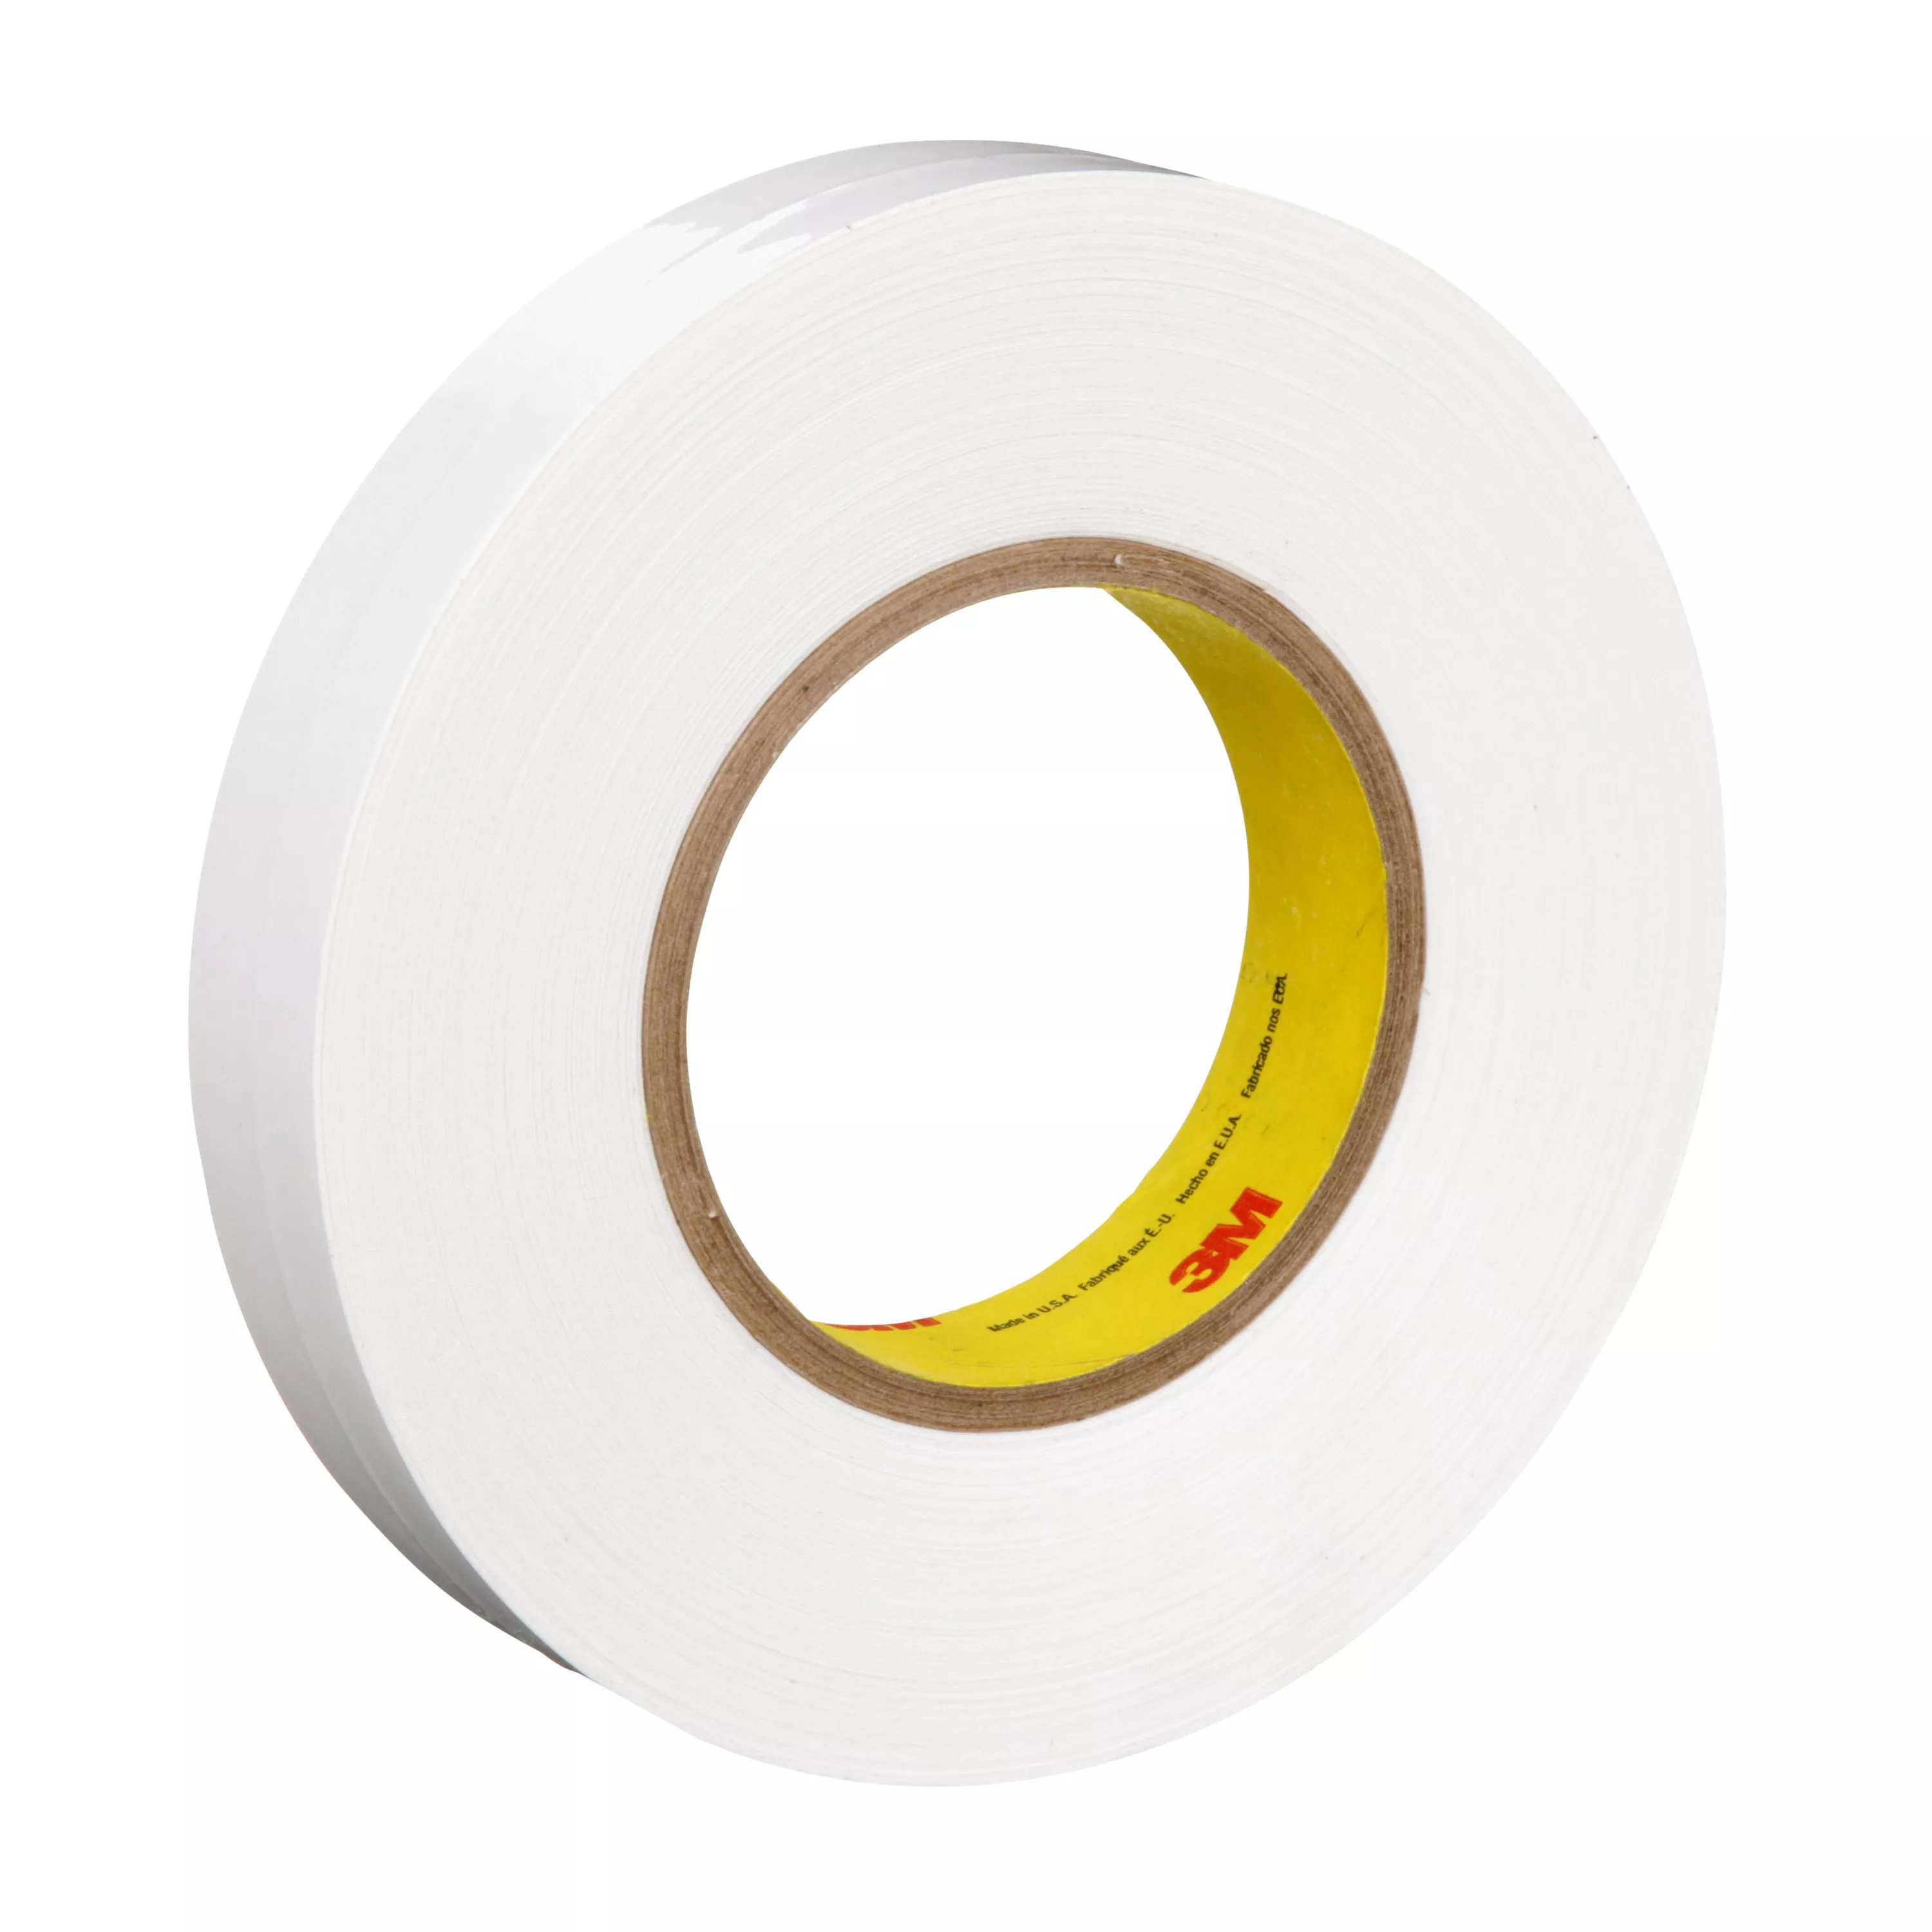 SKU 7000048460 | 3M™ Removable Repositionable Tape 666